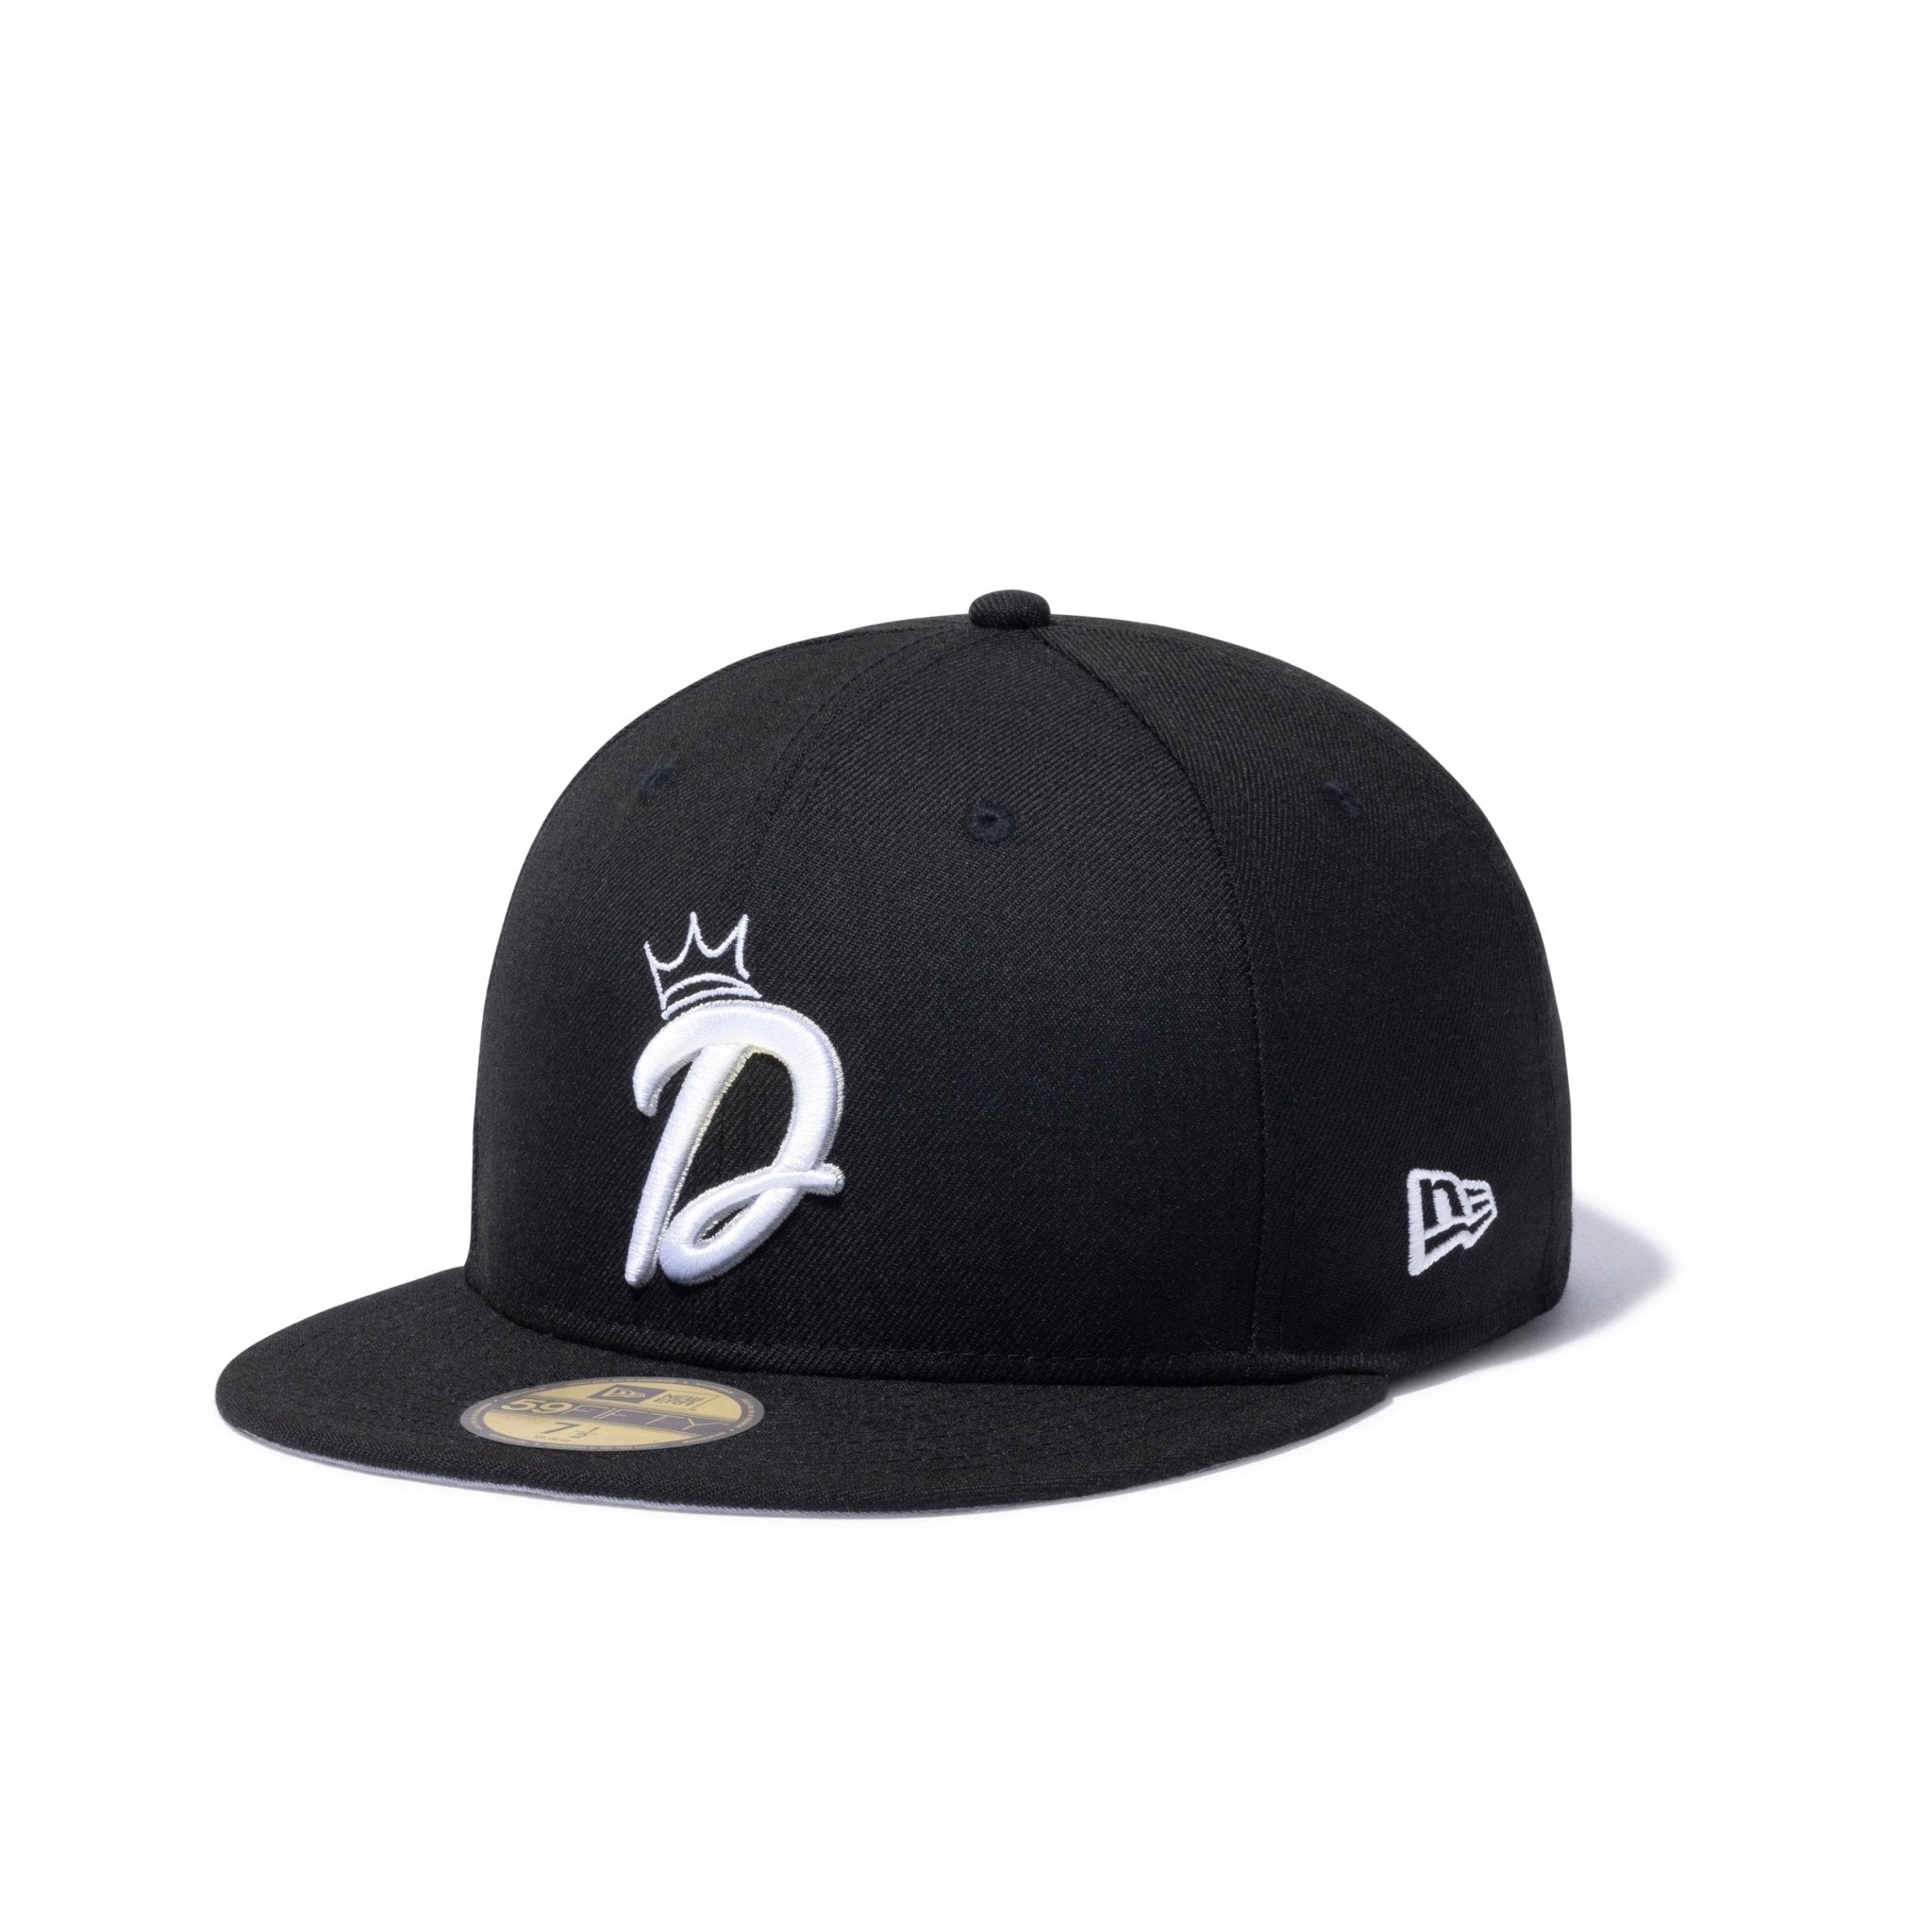 59FIFTY Dogear Records Dロゴ ブラック